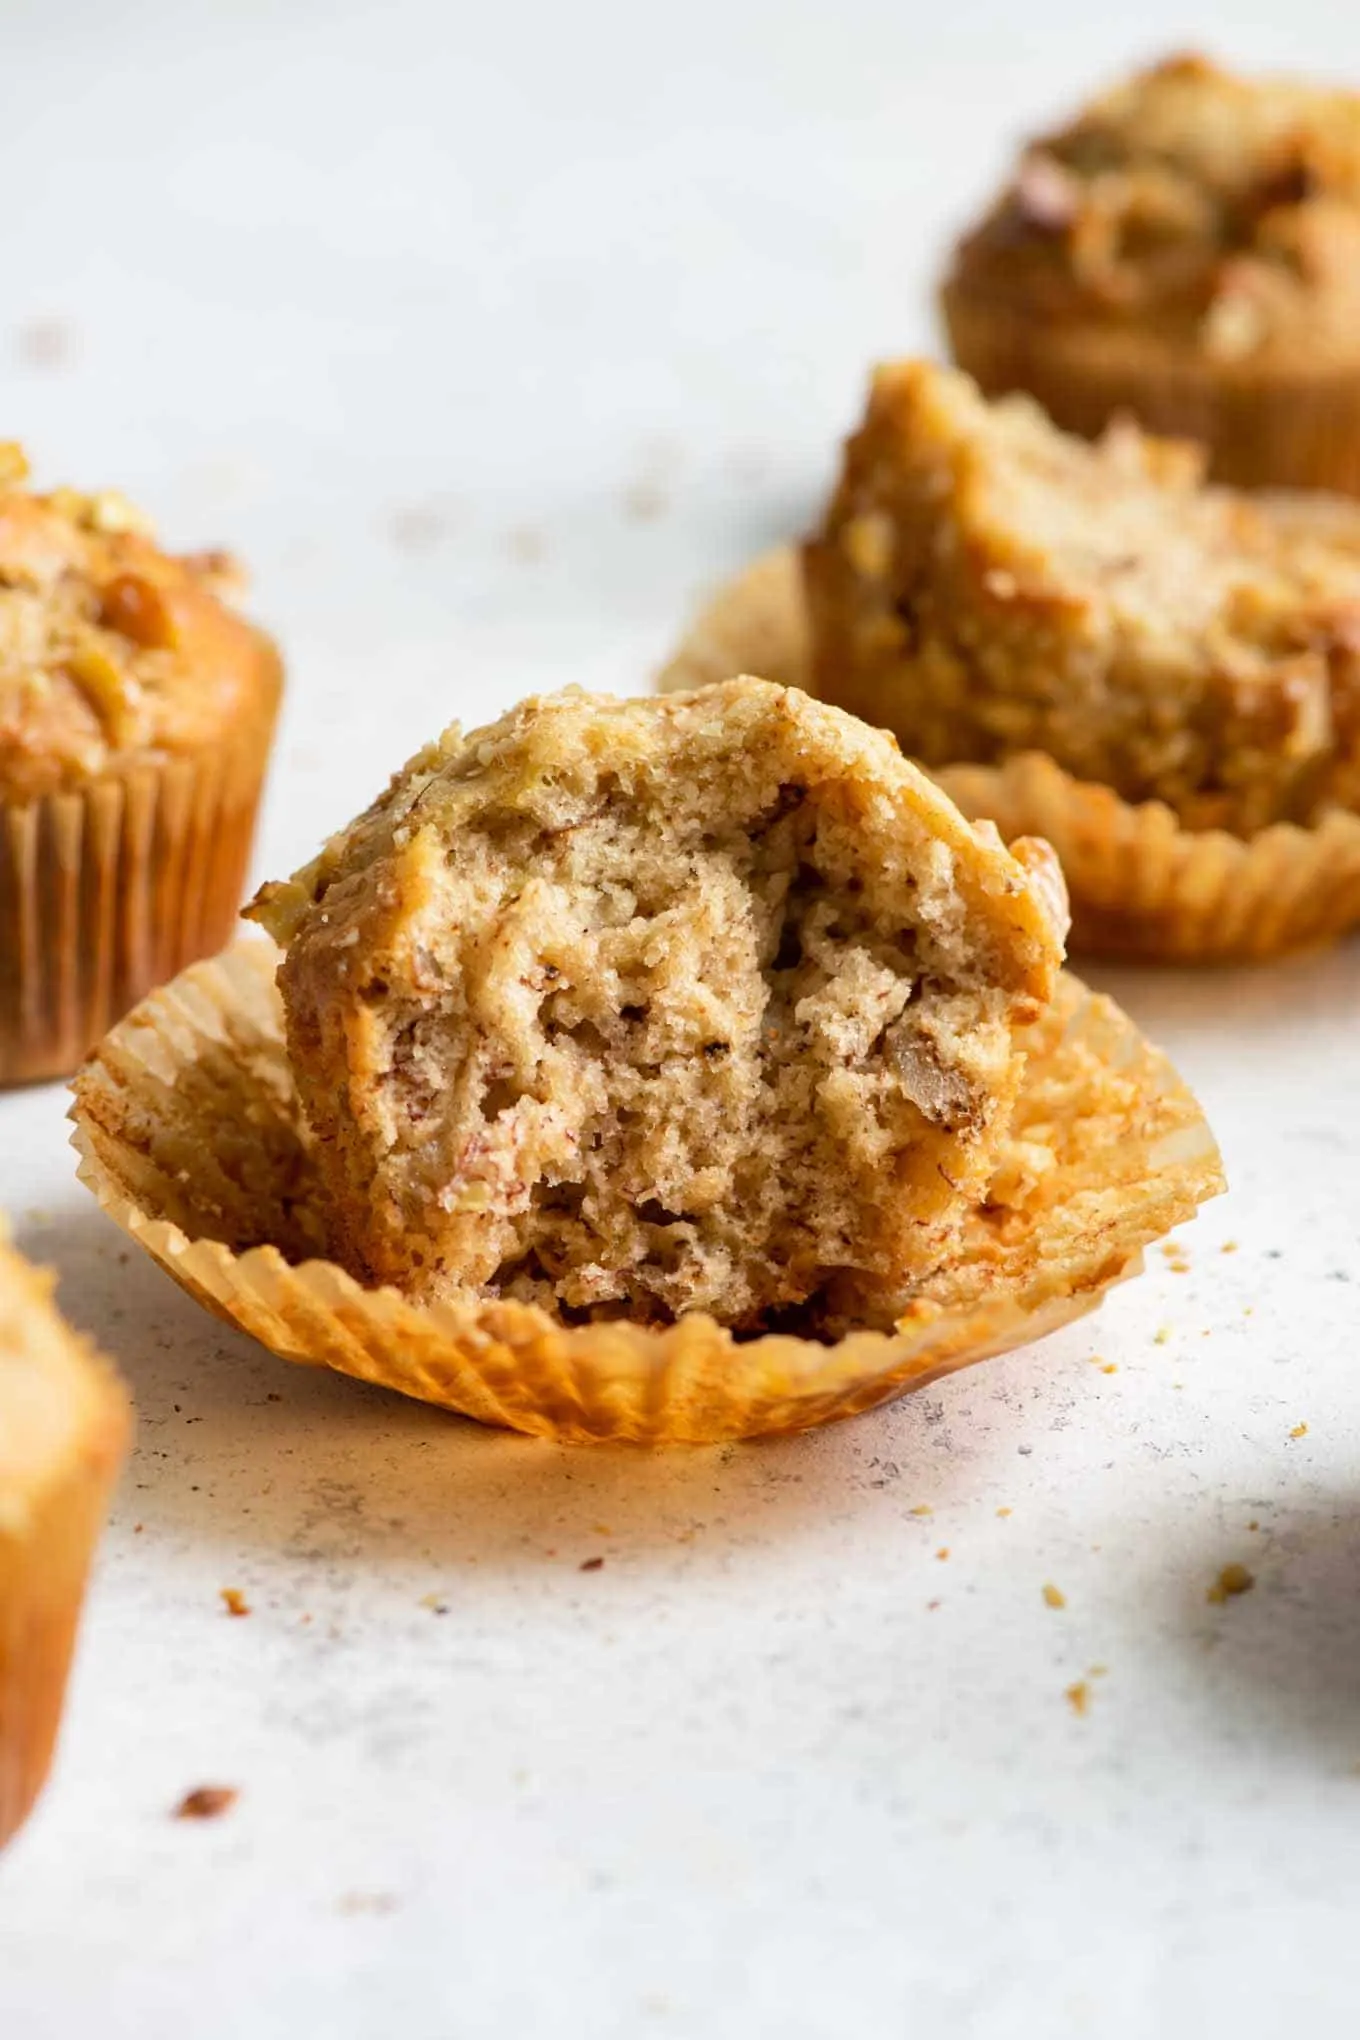 muffin with wrapper peeled off and bite taken out of it to show the crumb